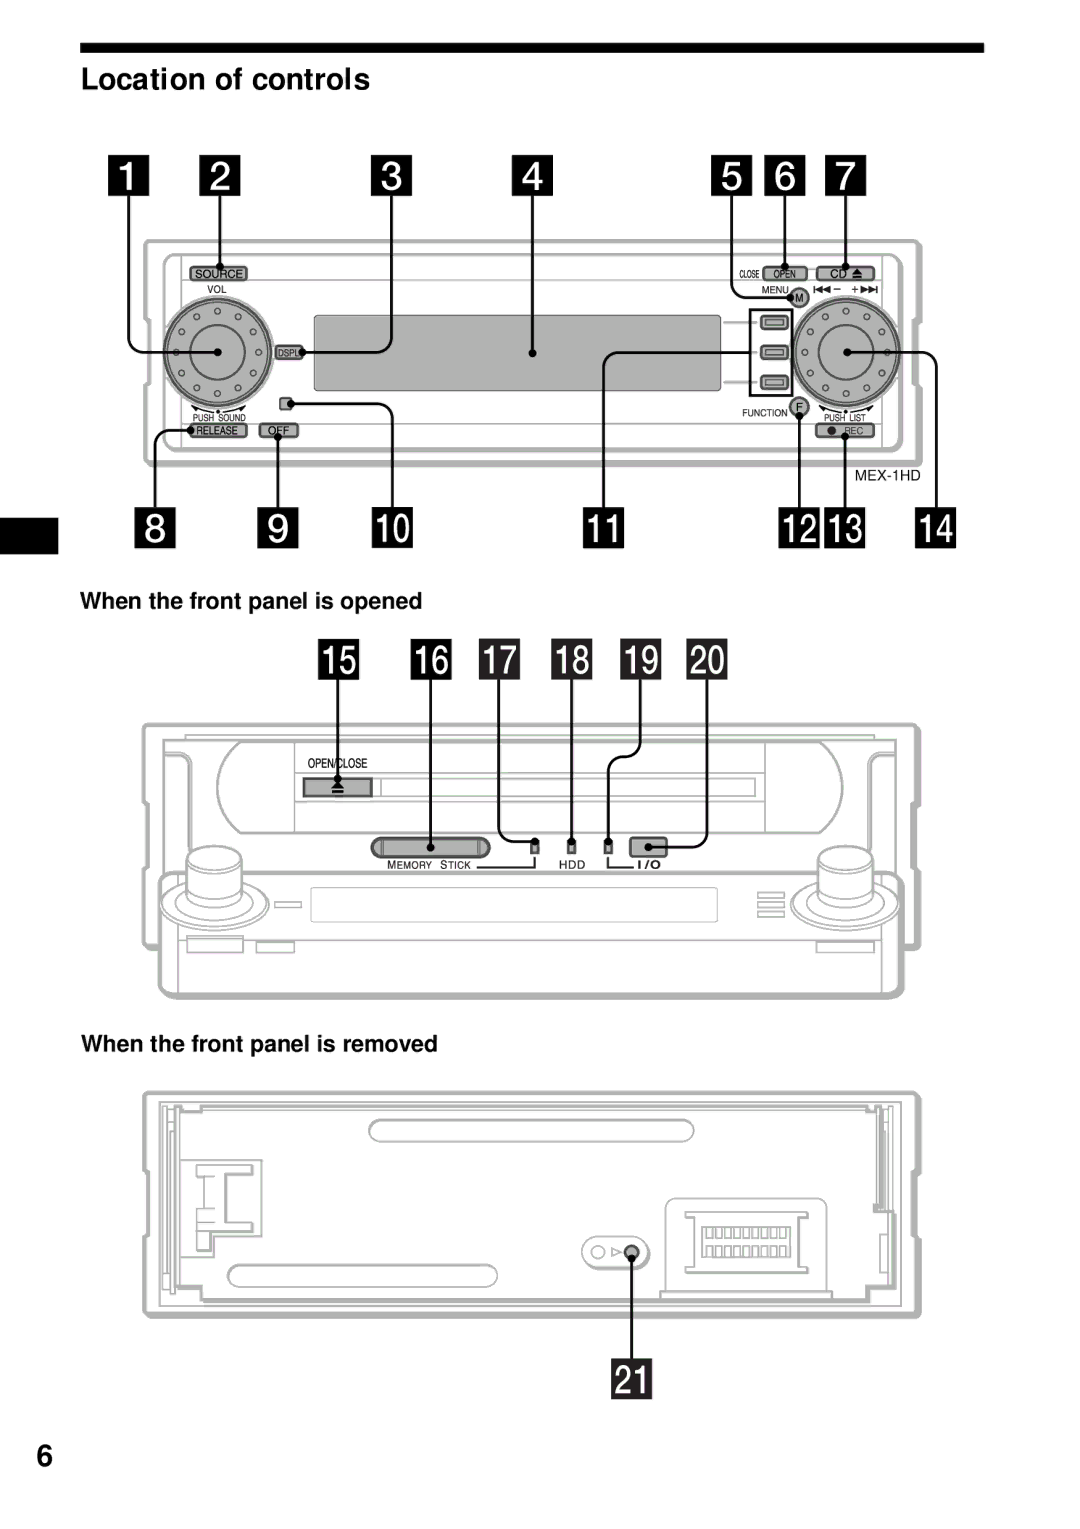 Sony MEX-1HD operating instructions Location of controls 